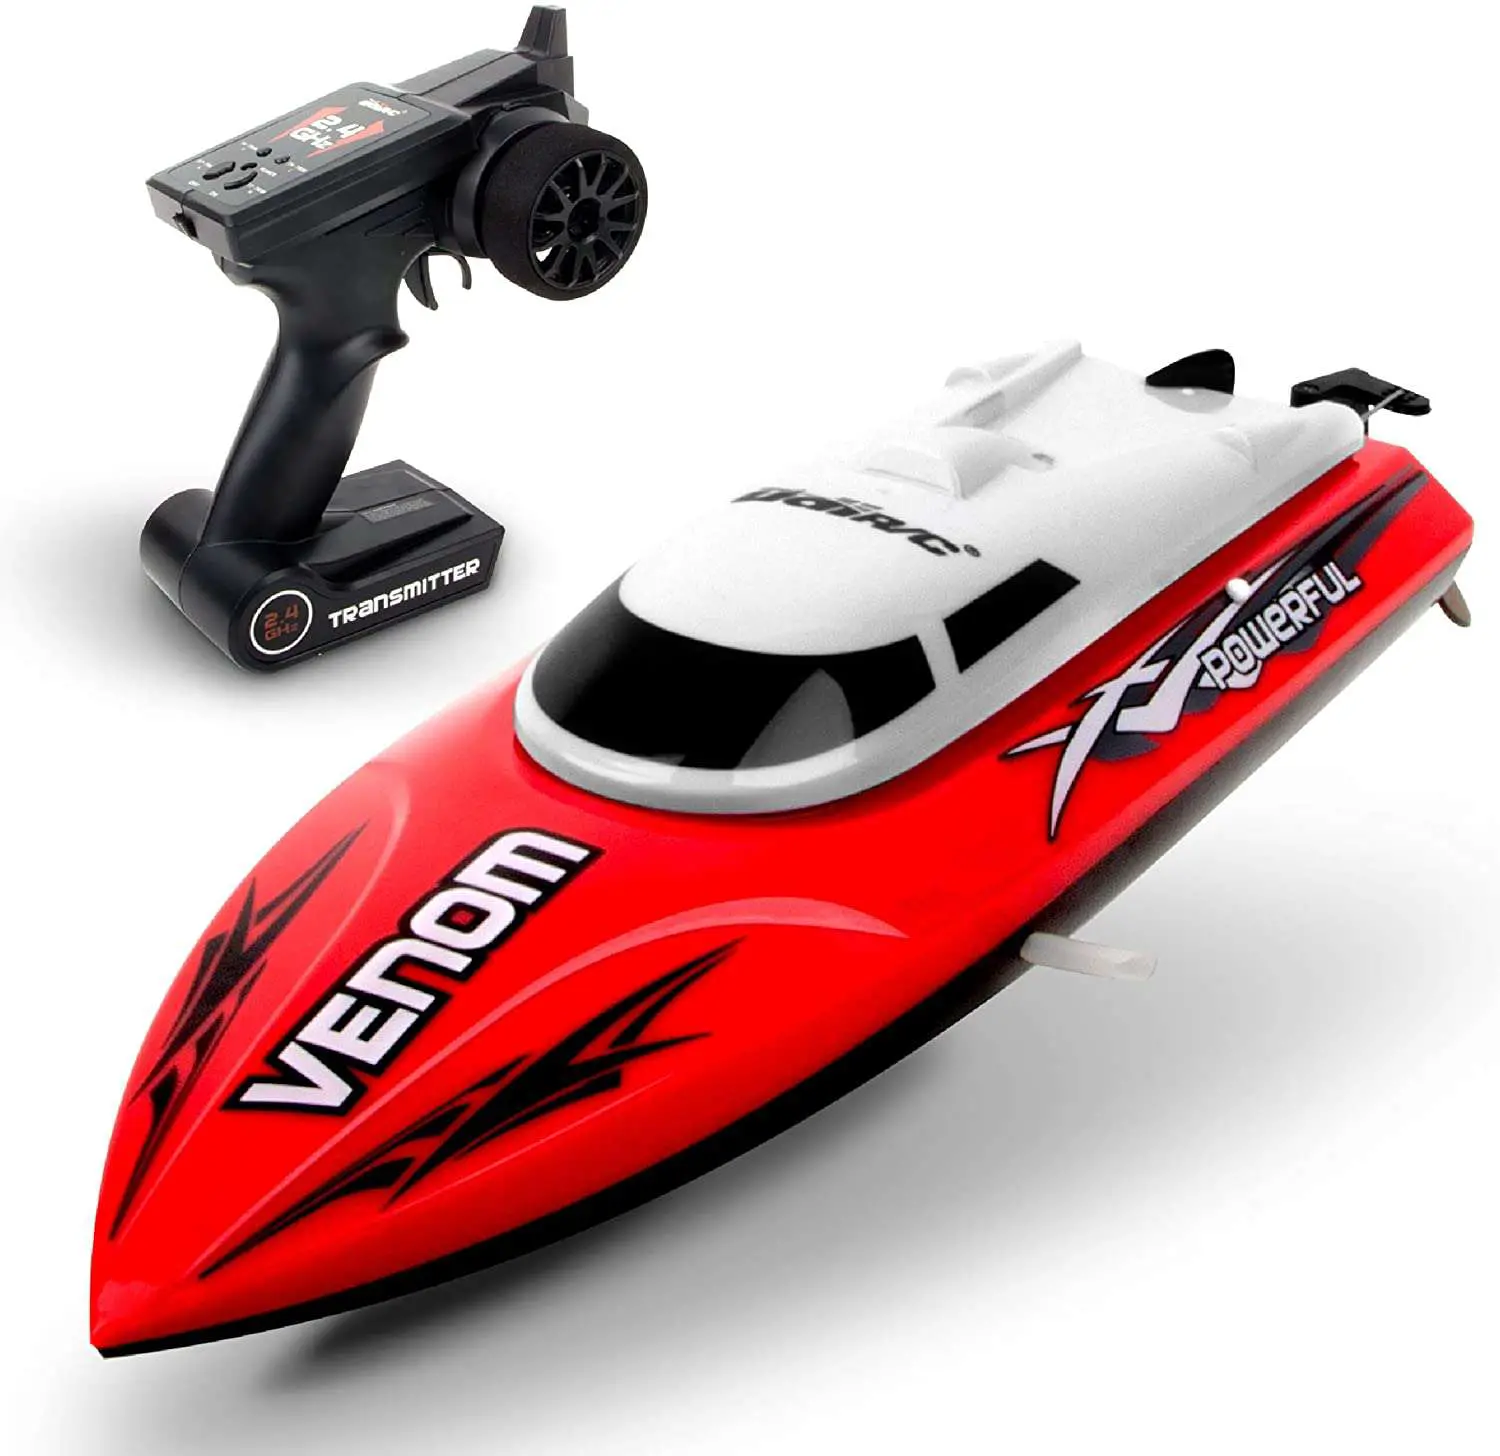 Top 8 Best Remote Control Boats For Beginners